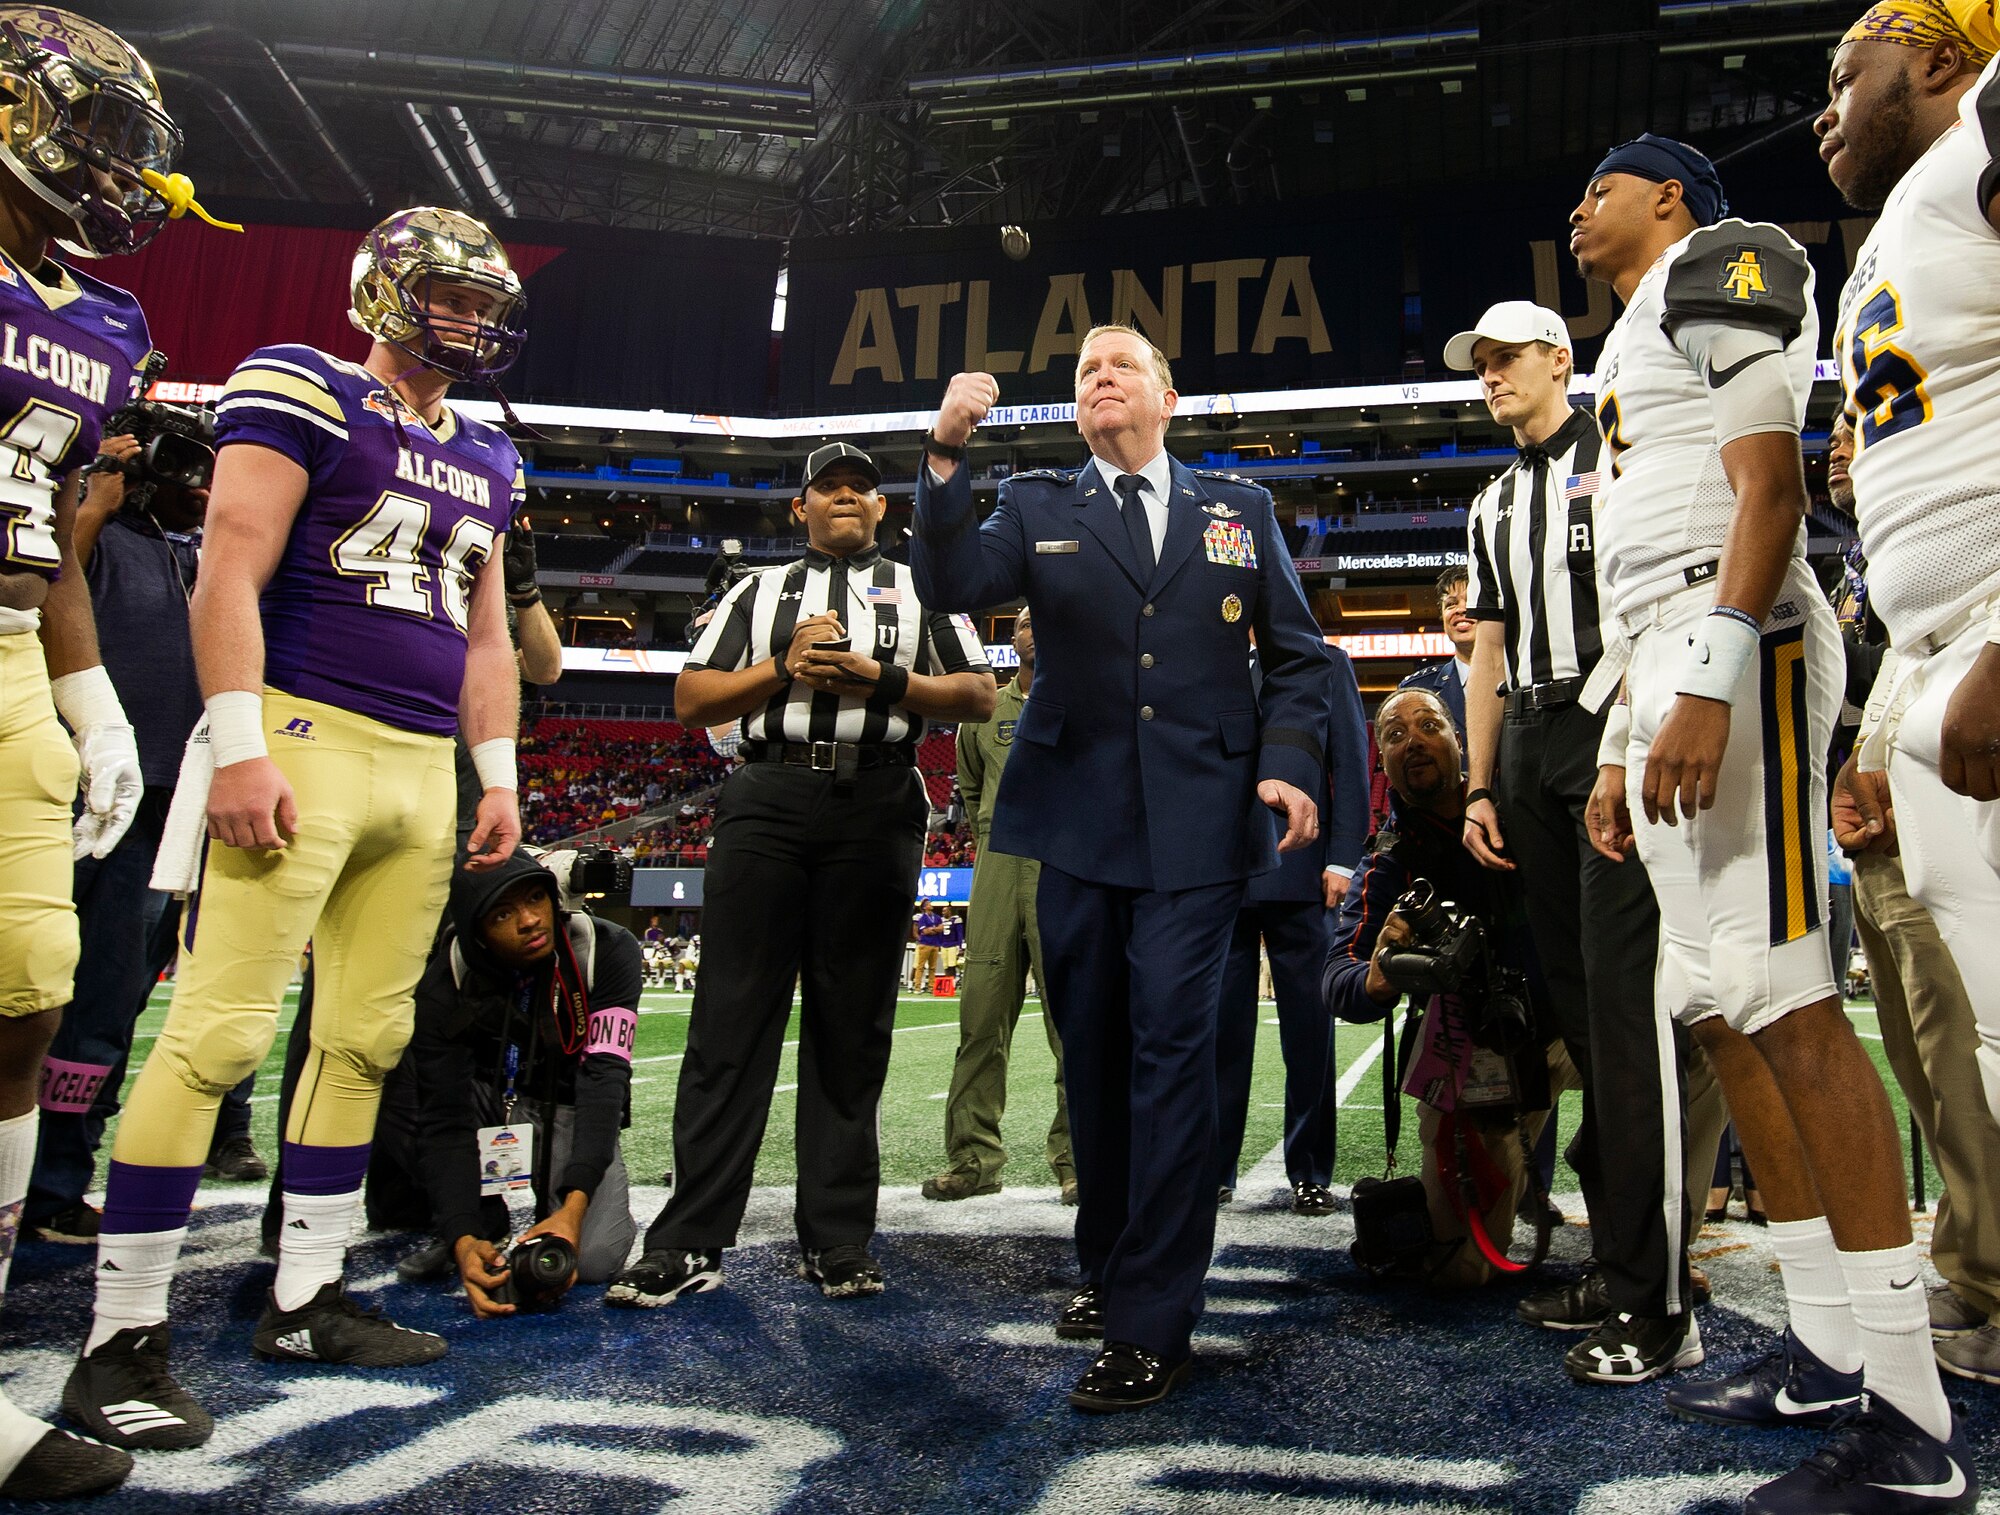 Lt. Gen. Richard W. Scobee, Commander, Air Force Reserve Command, tosses the game coin in the air at midfield of the Mercedes-Benz Stadium in Atlanta, Georgia, before the start of the Air Force Reserve Celebration Bowl, December 15, 2018. (U.S. Air Force photo by Master Sgt. Stephen D. Schester)